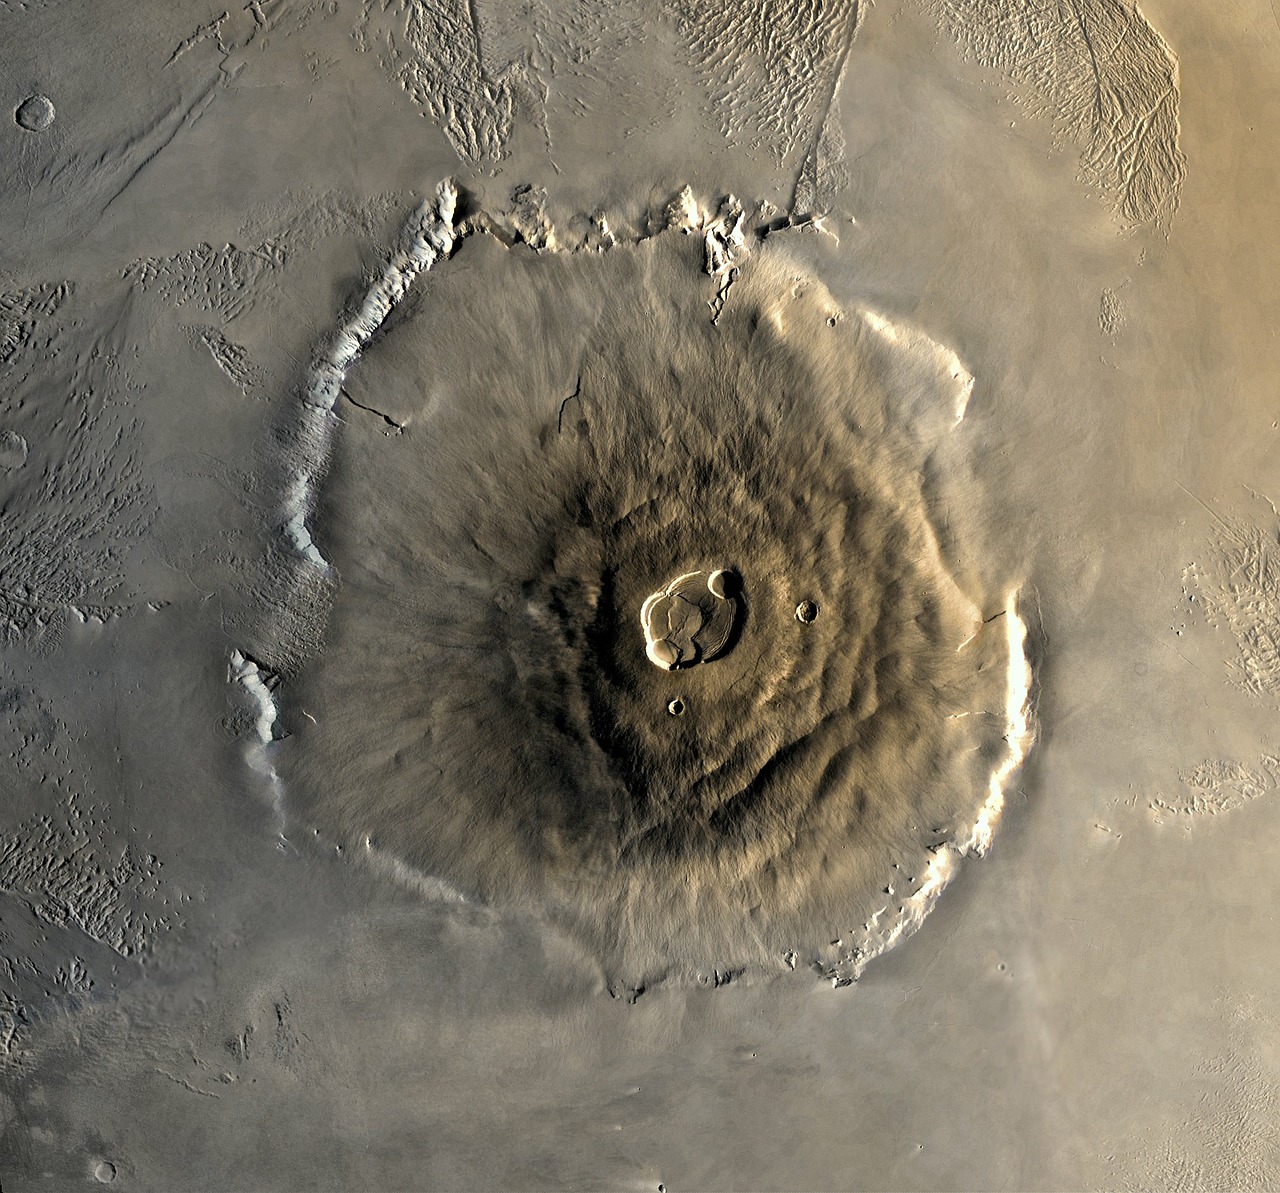 mars,planet,olympus mons,volcano,mountain,highest mountains,space,space travel,solar system,free pictures, free photos, free images, royalty free, free illustrations, public domain